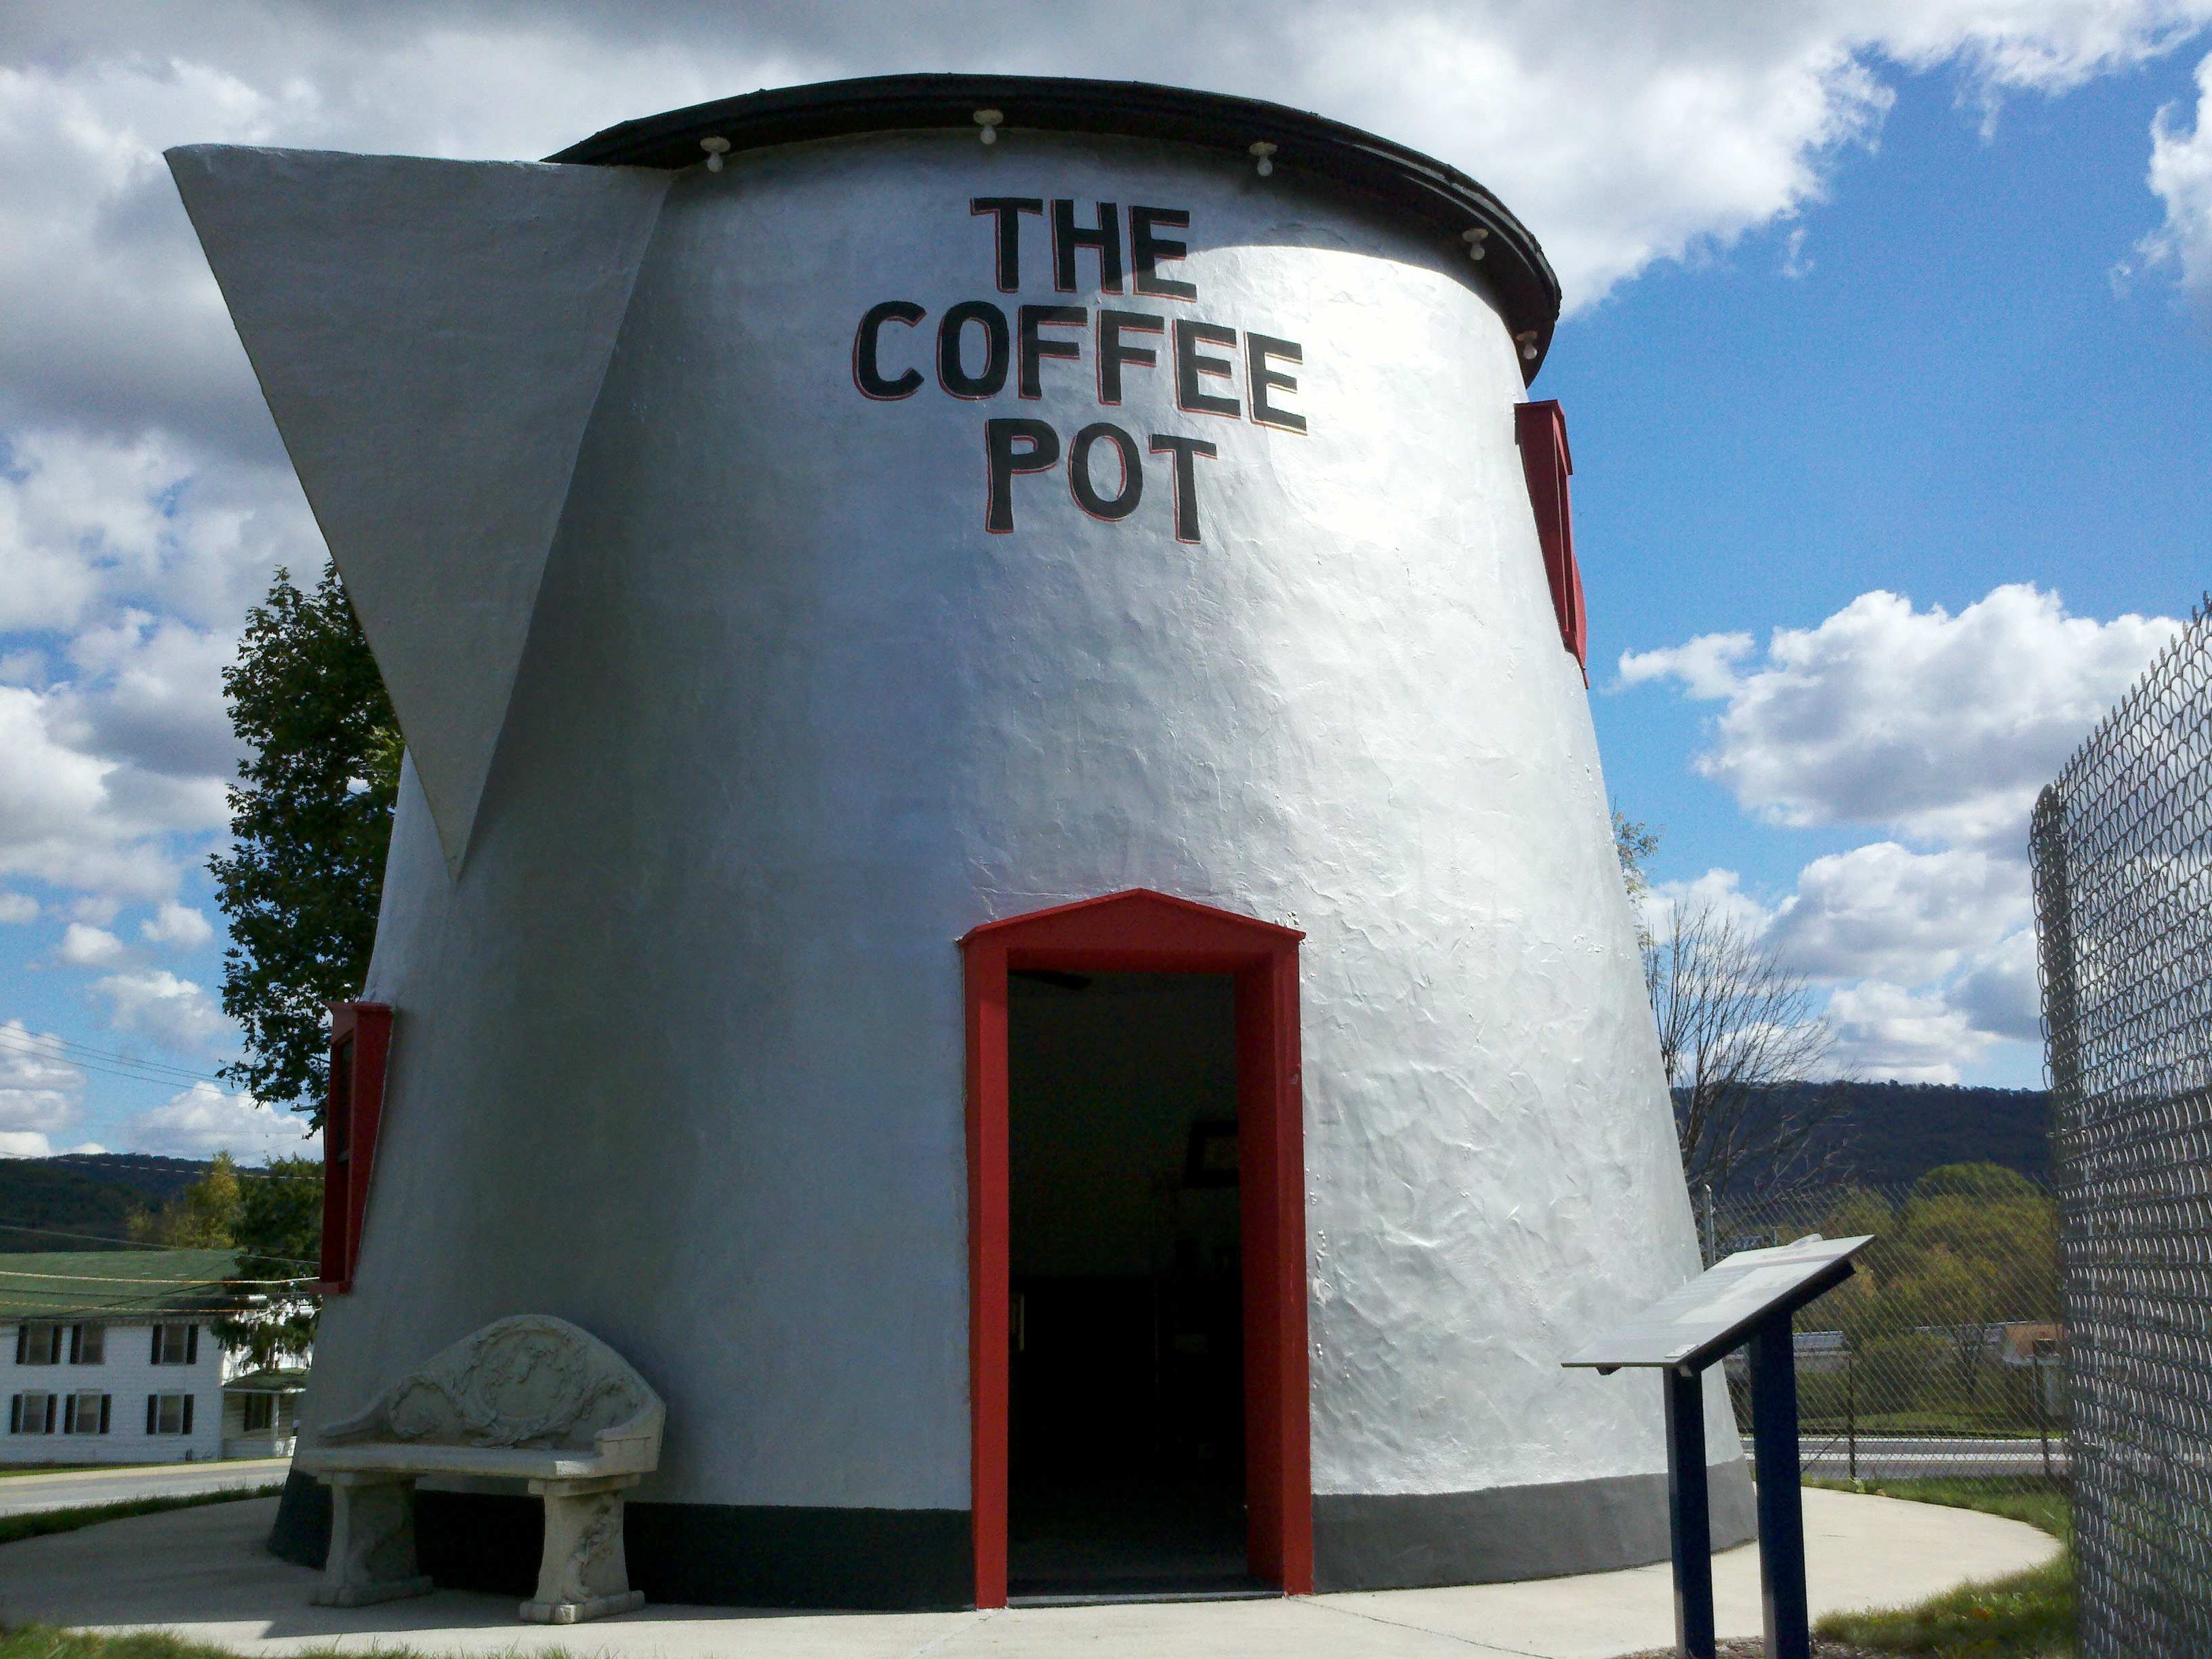 The restored Bedford Coffee Pot